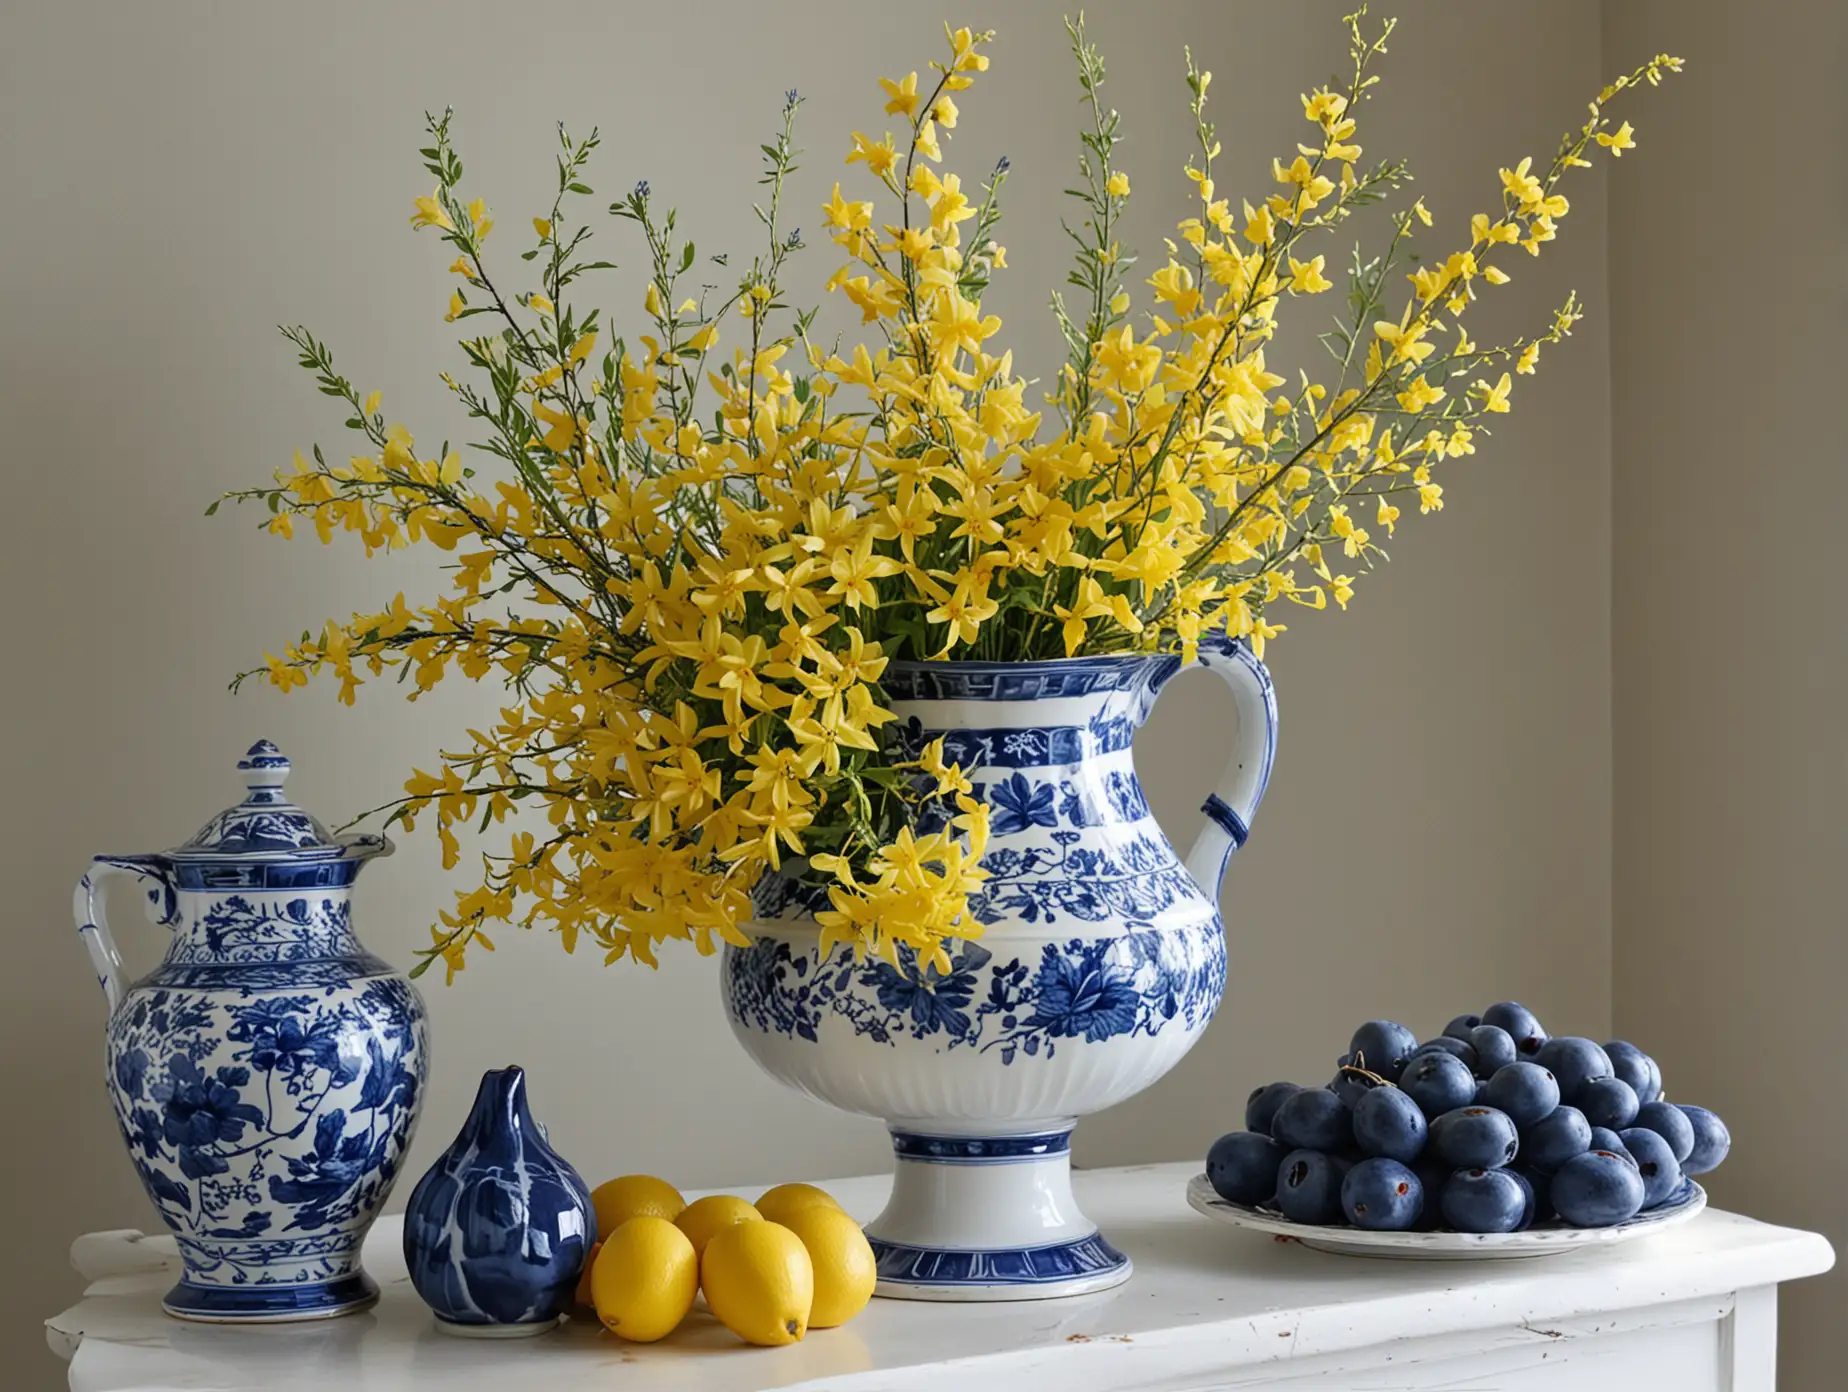 Blue and White Compote with Forsythia Branches Elegant Display of Fruit and Flowers